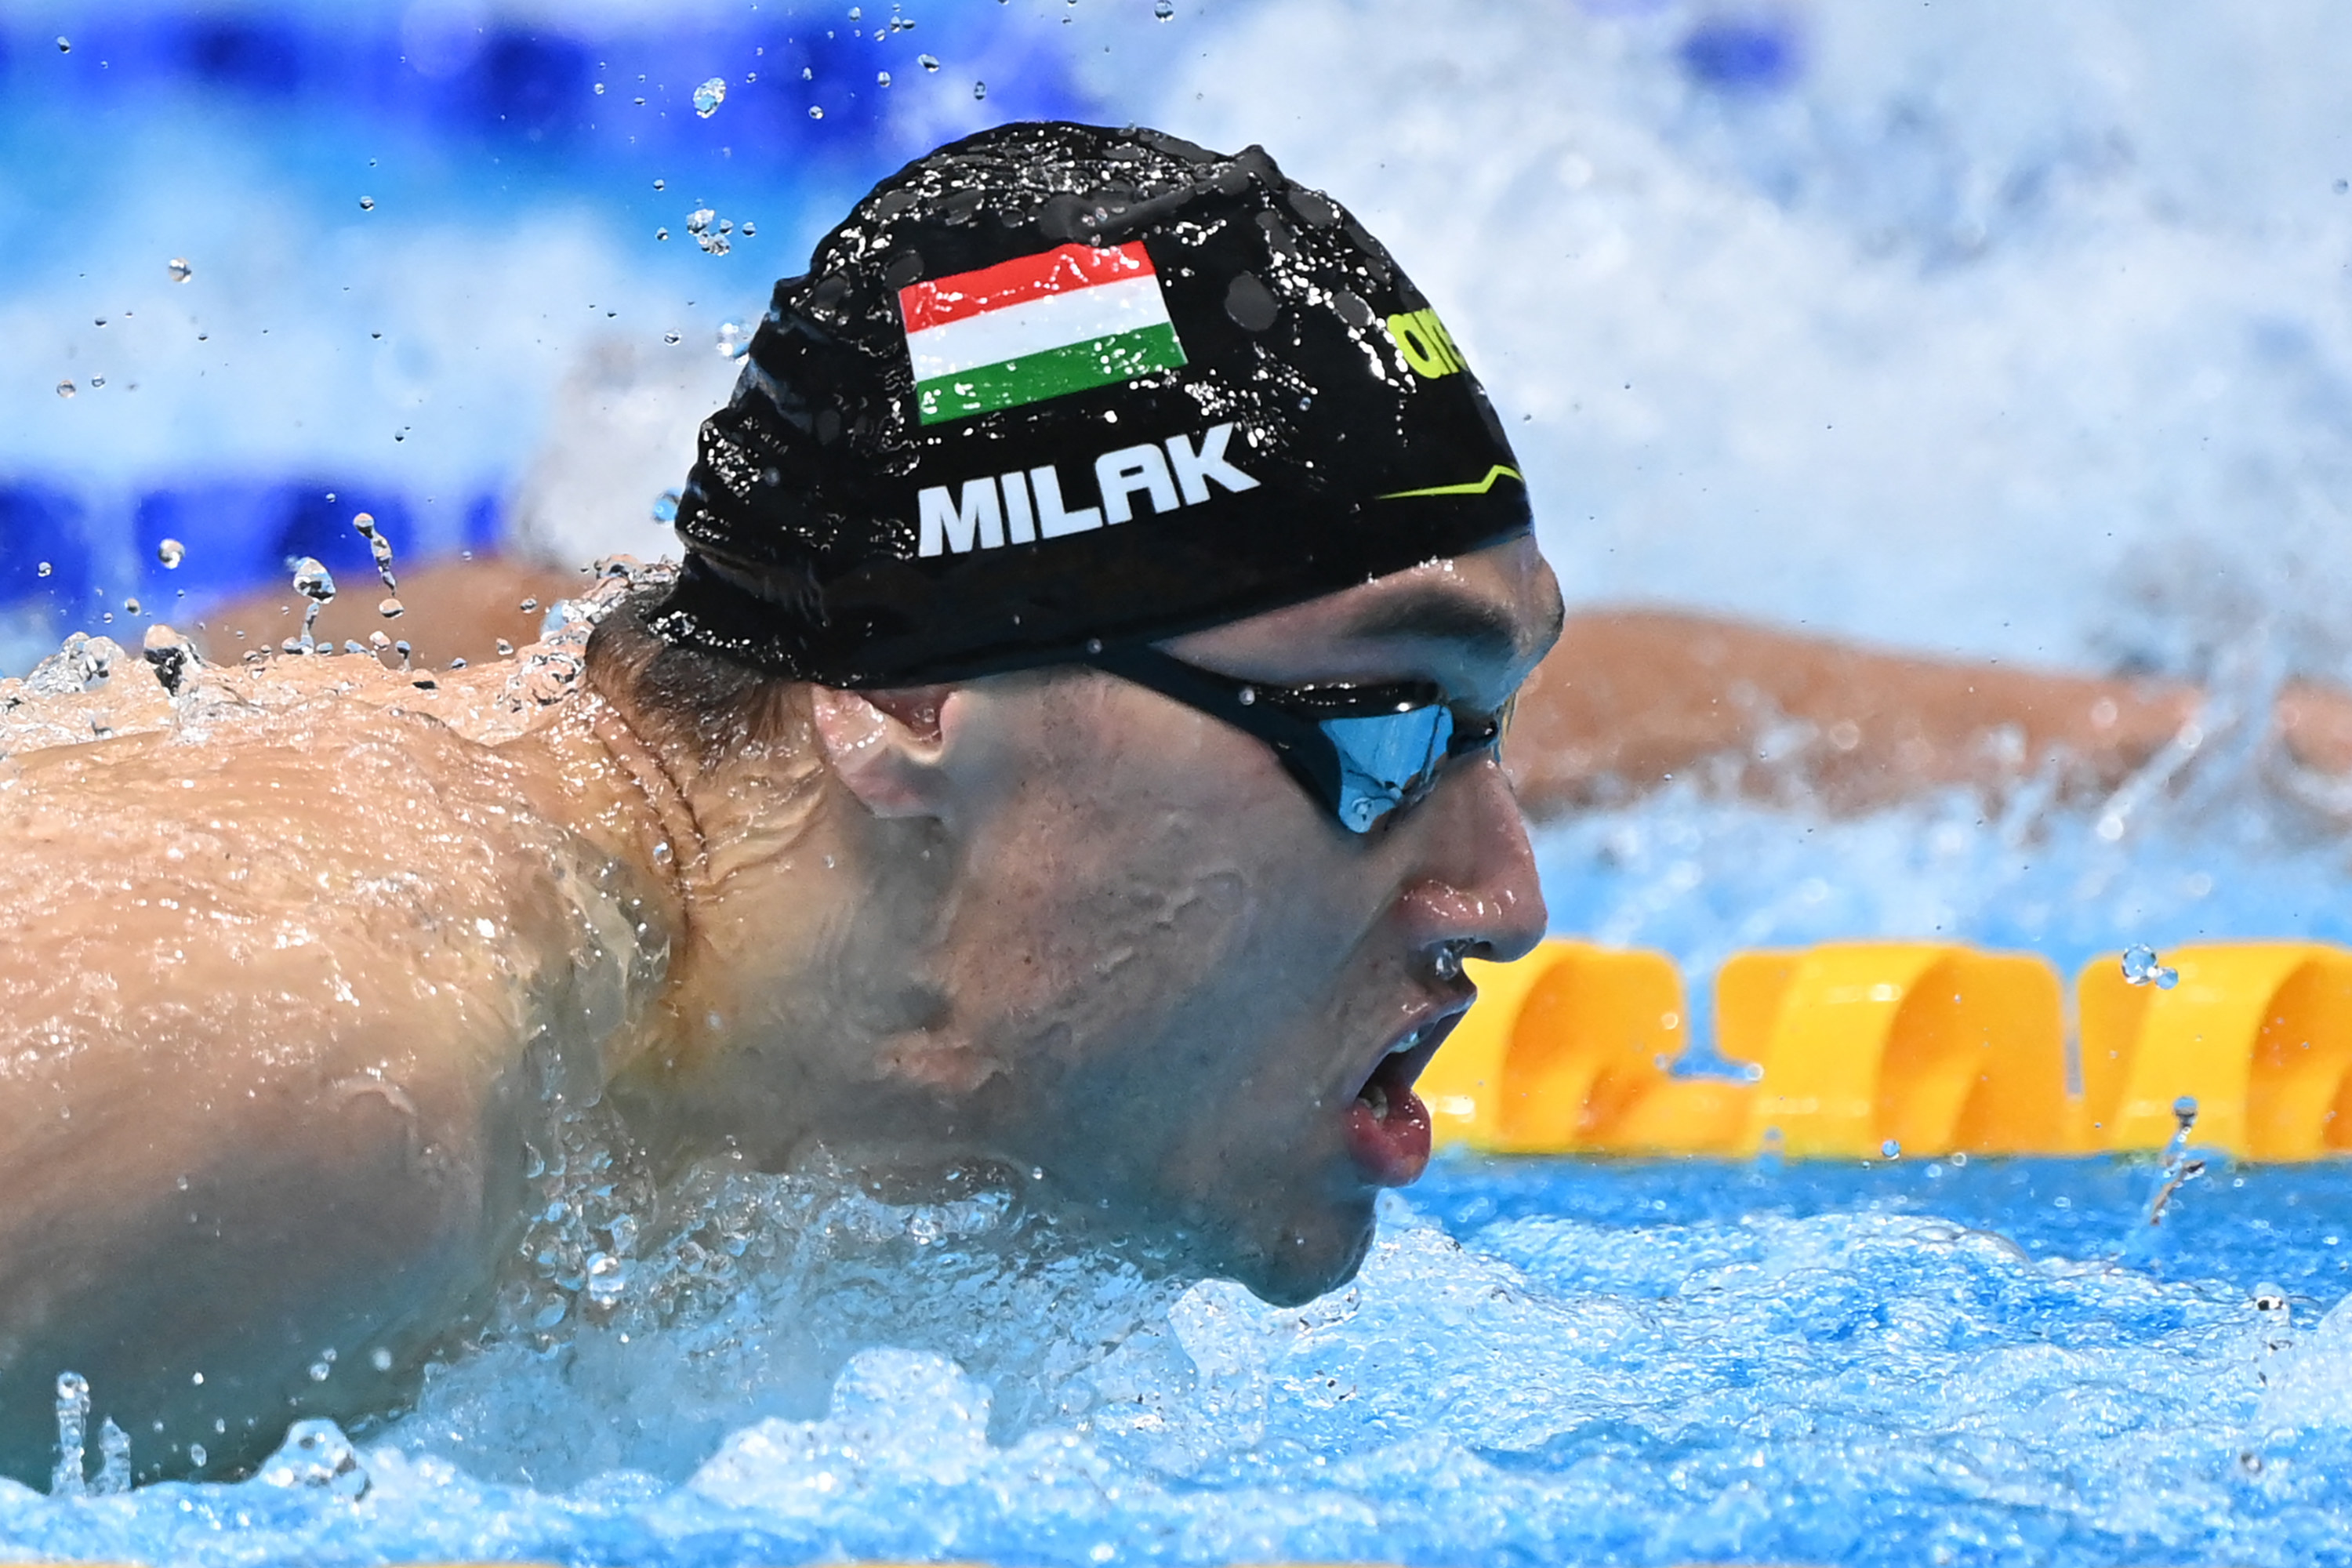 A Hungarian swimmer in the pool during a race